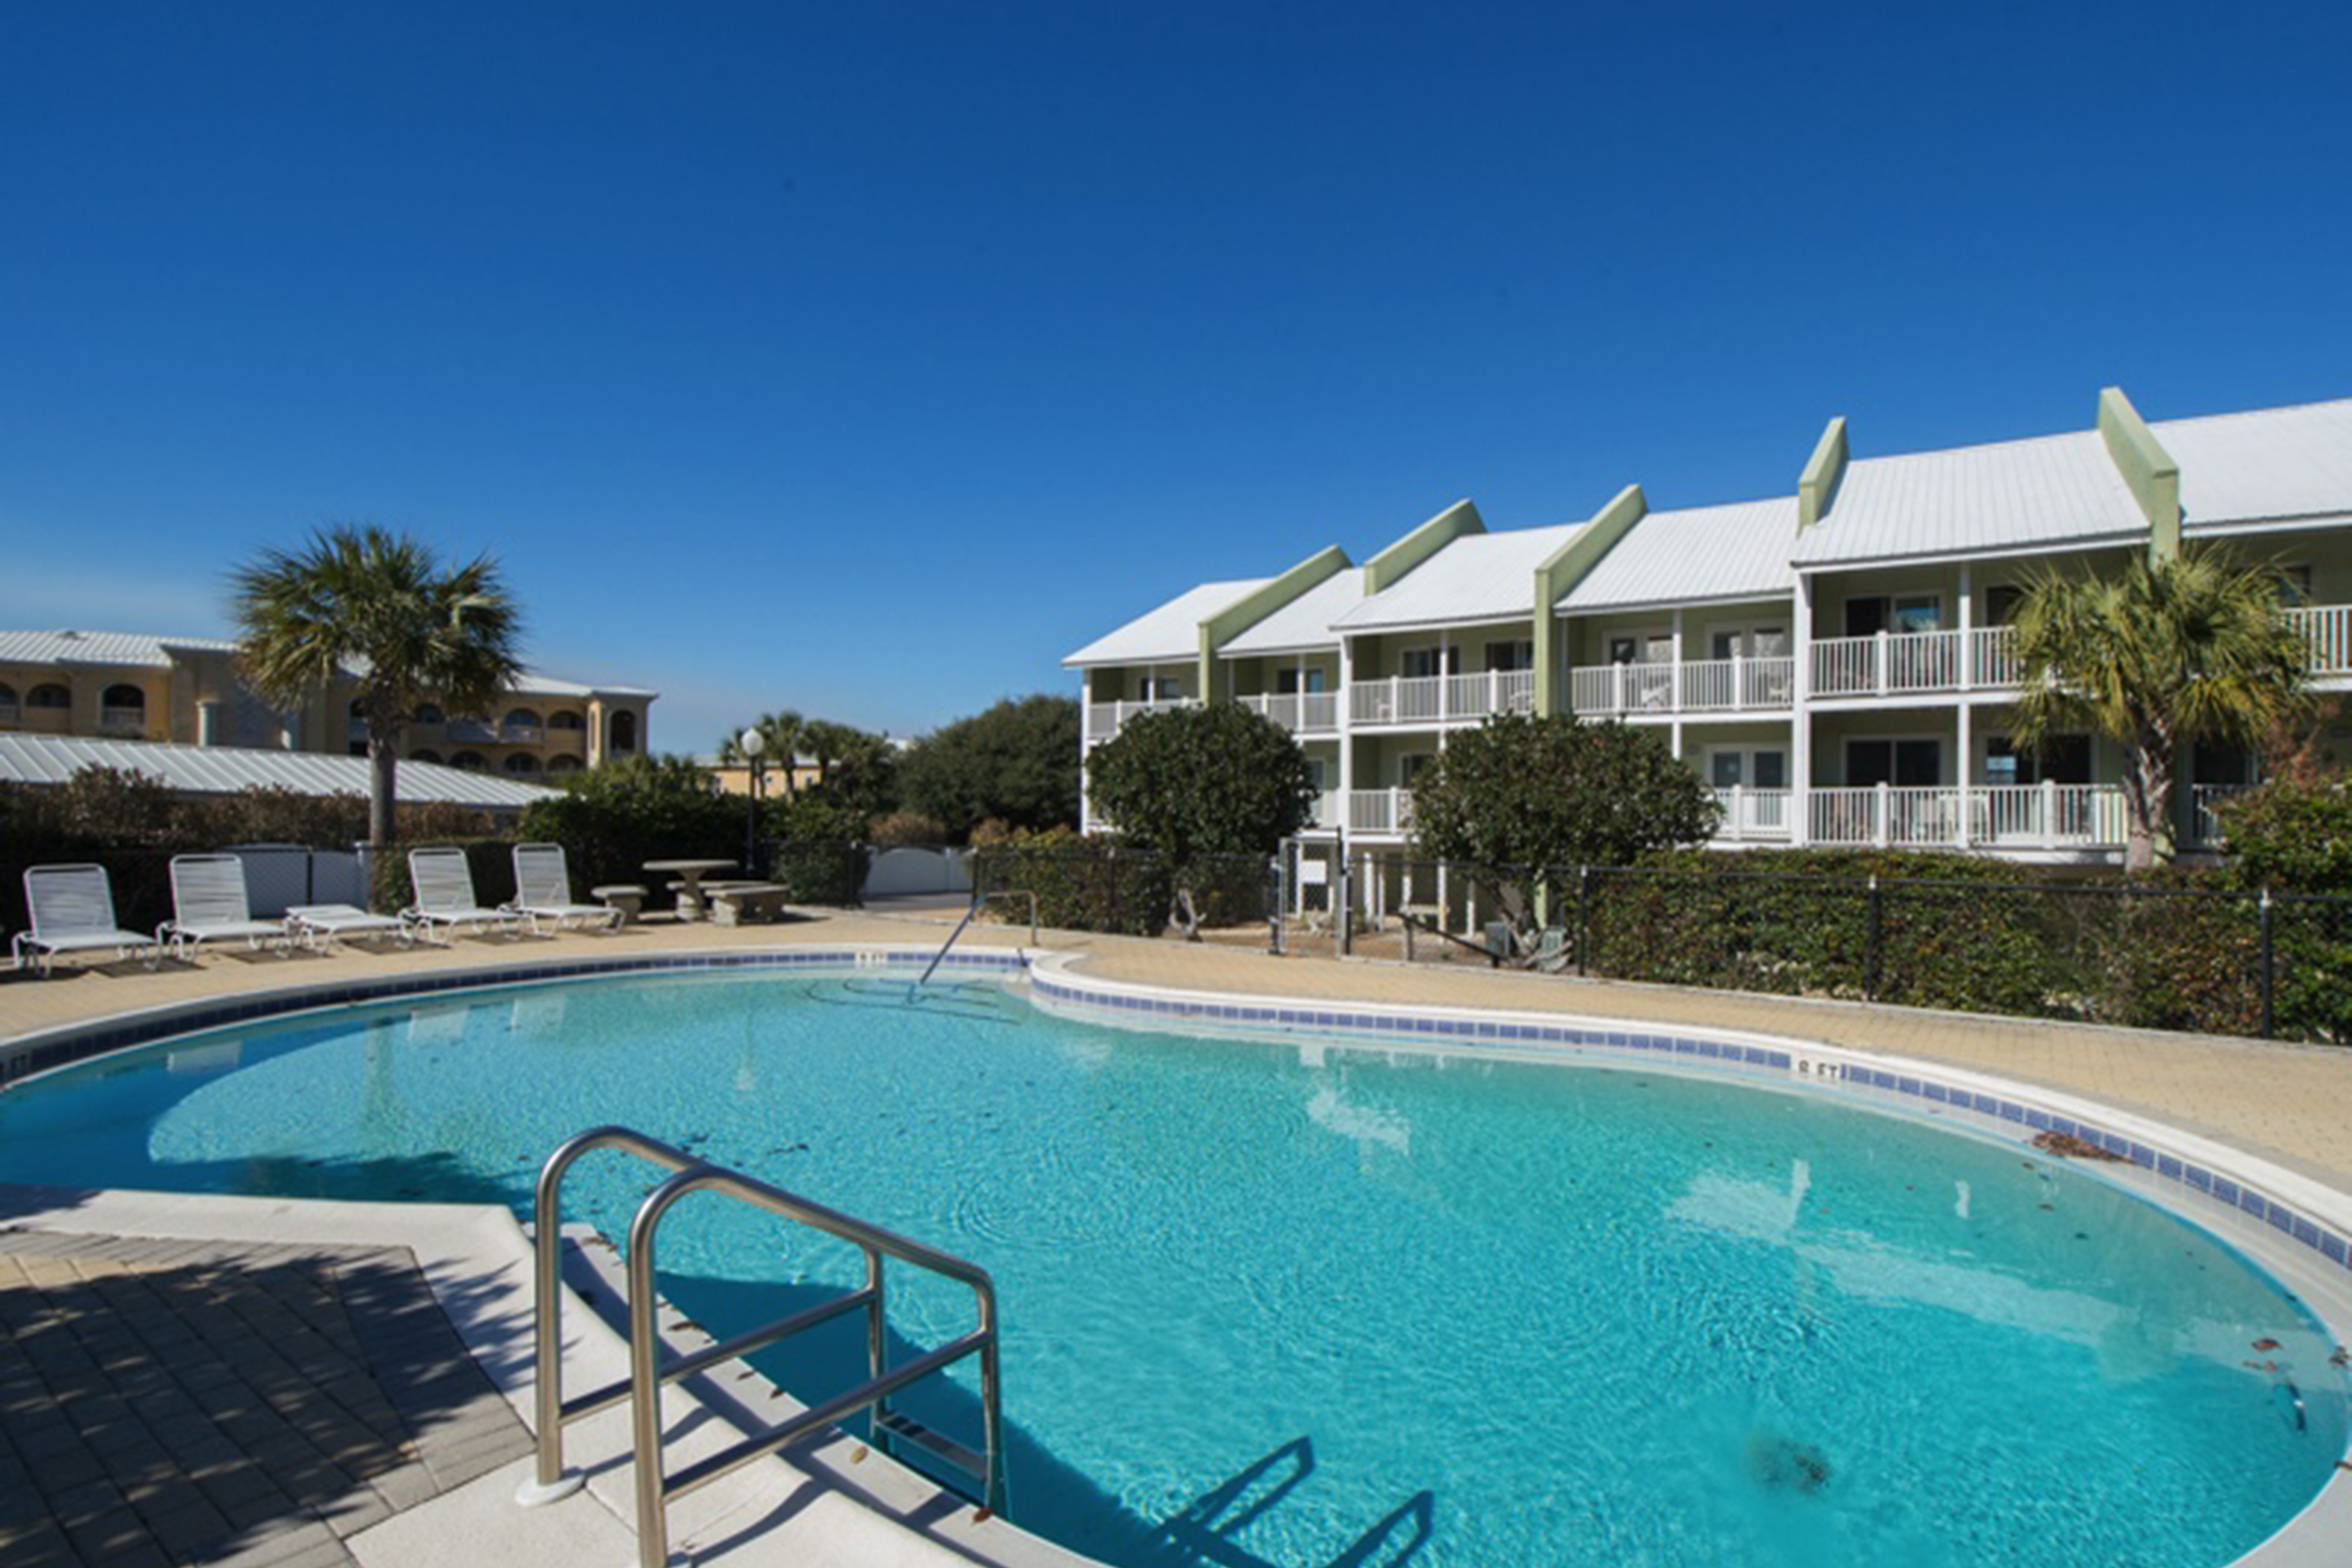 Sea Bluff Townhomes 19 House / Cottage rental in Santa Rosa Beach House Rentals in Highway 30-A Florida - #27